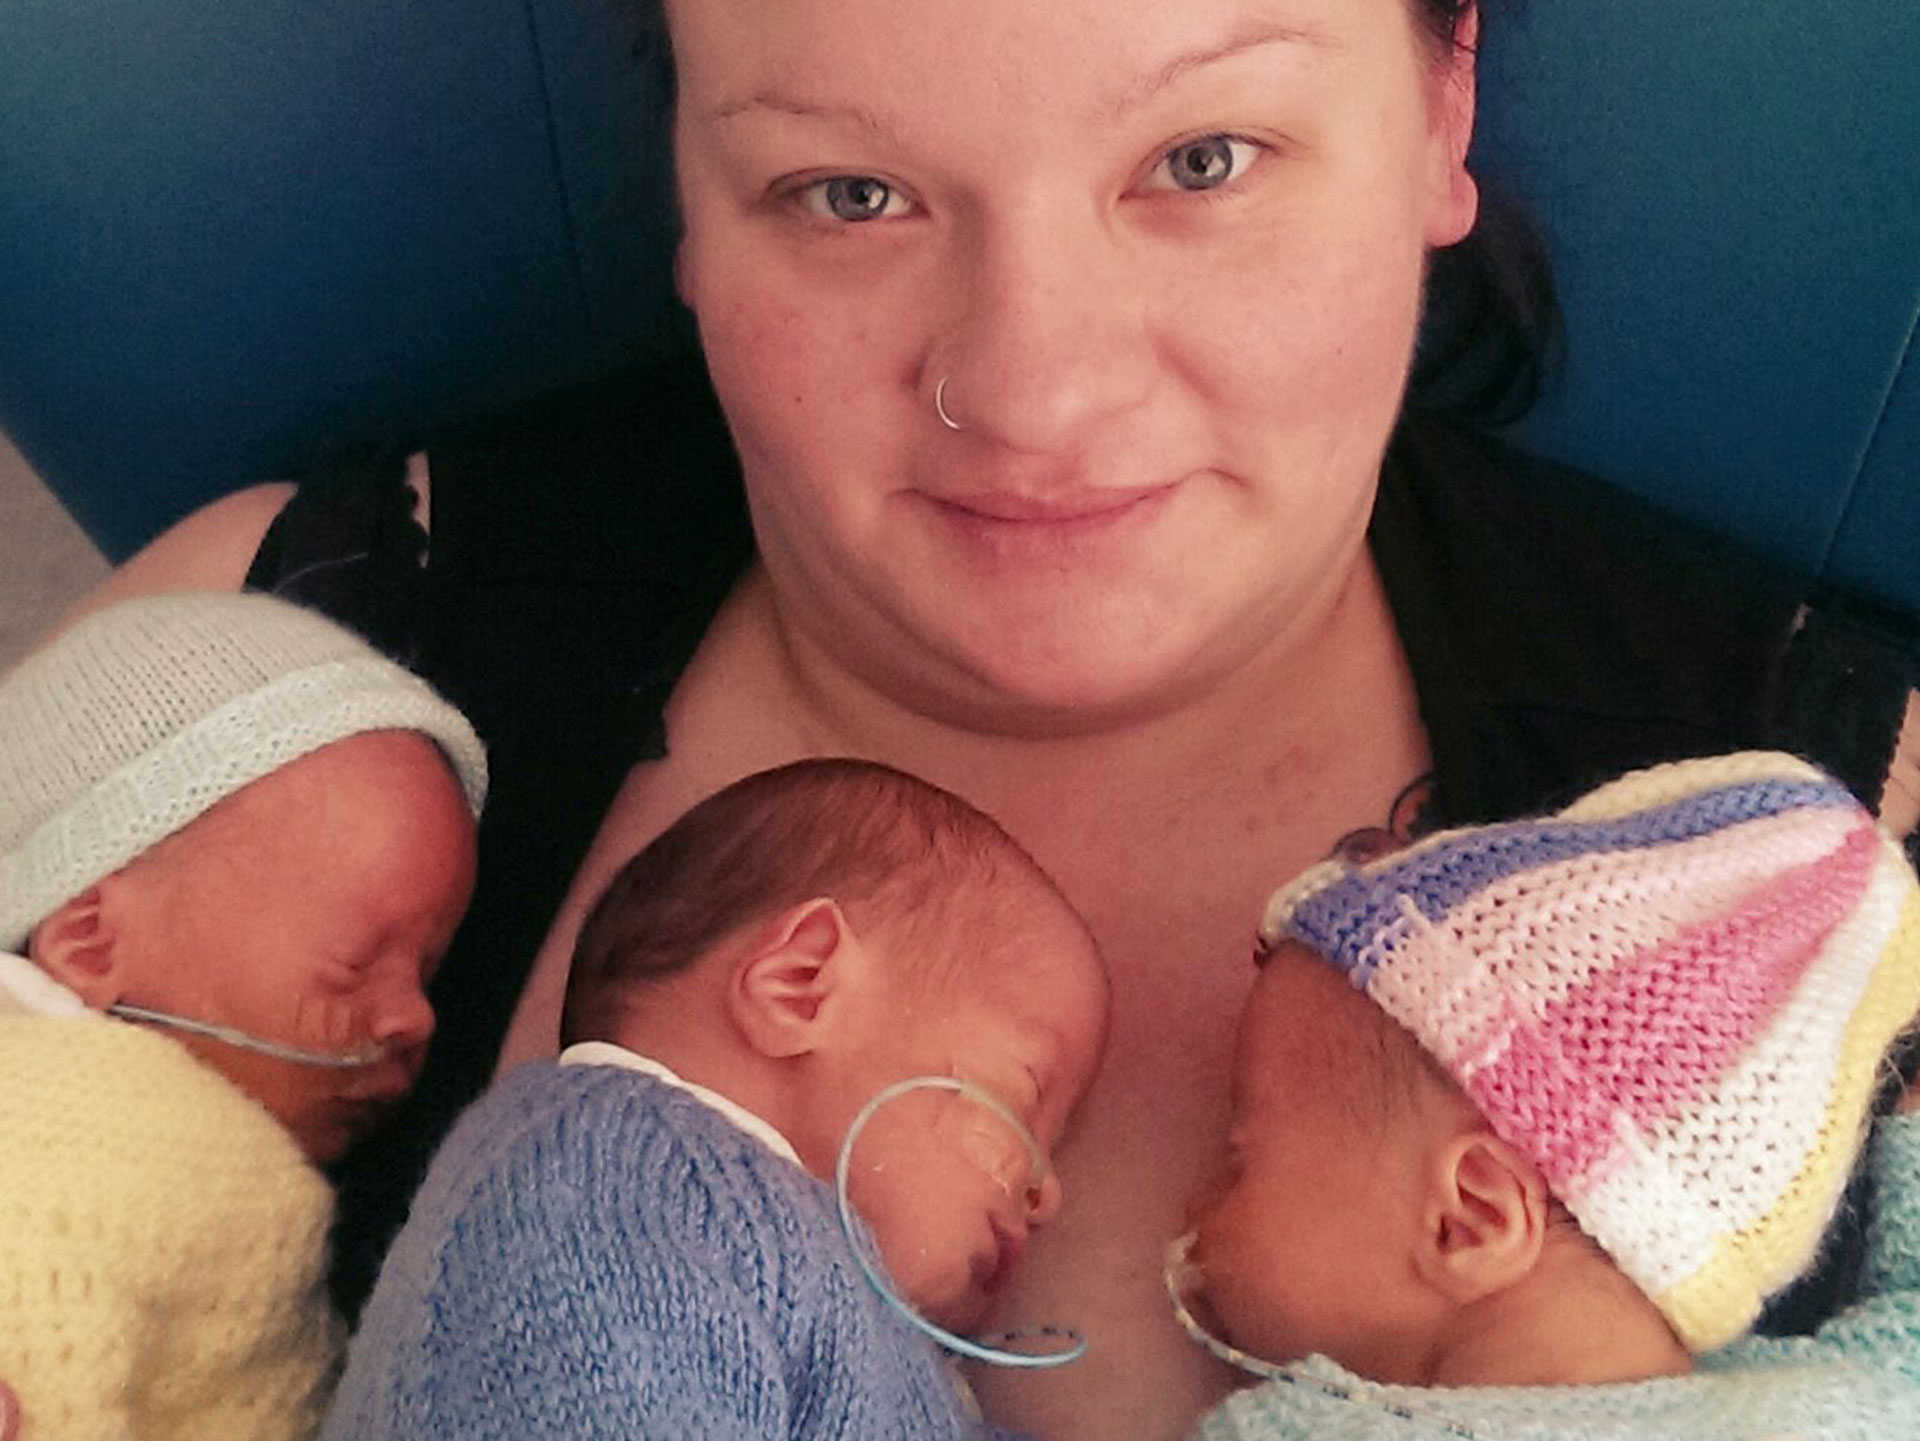 They said I was too fat for triplets